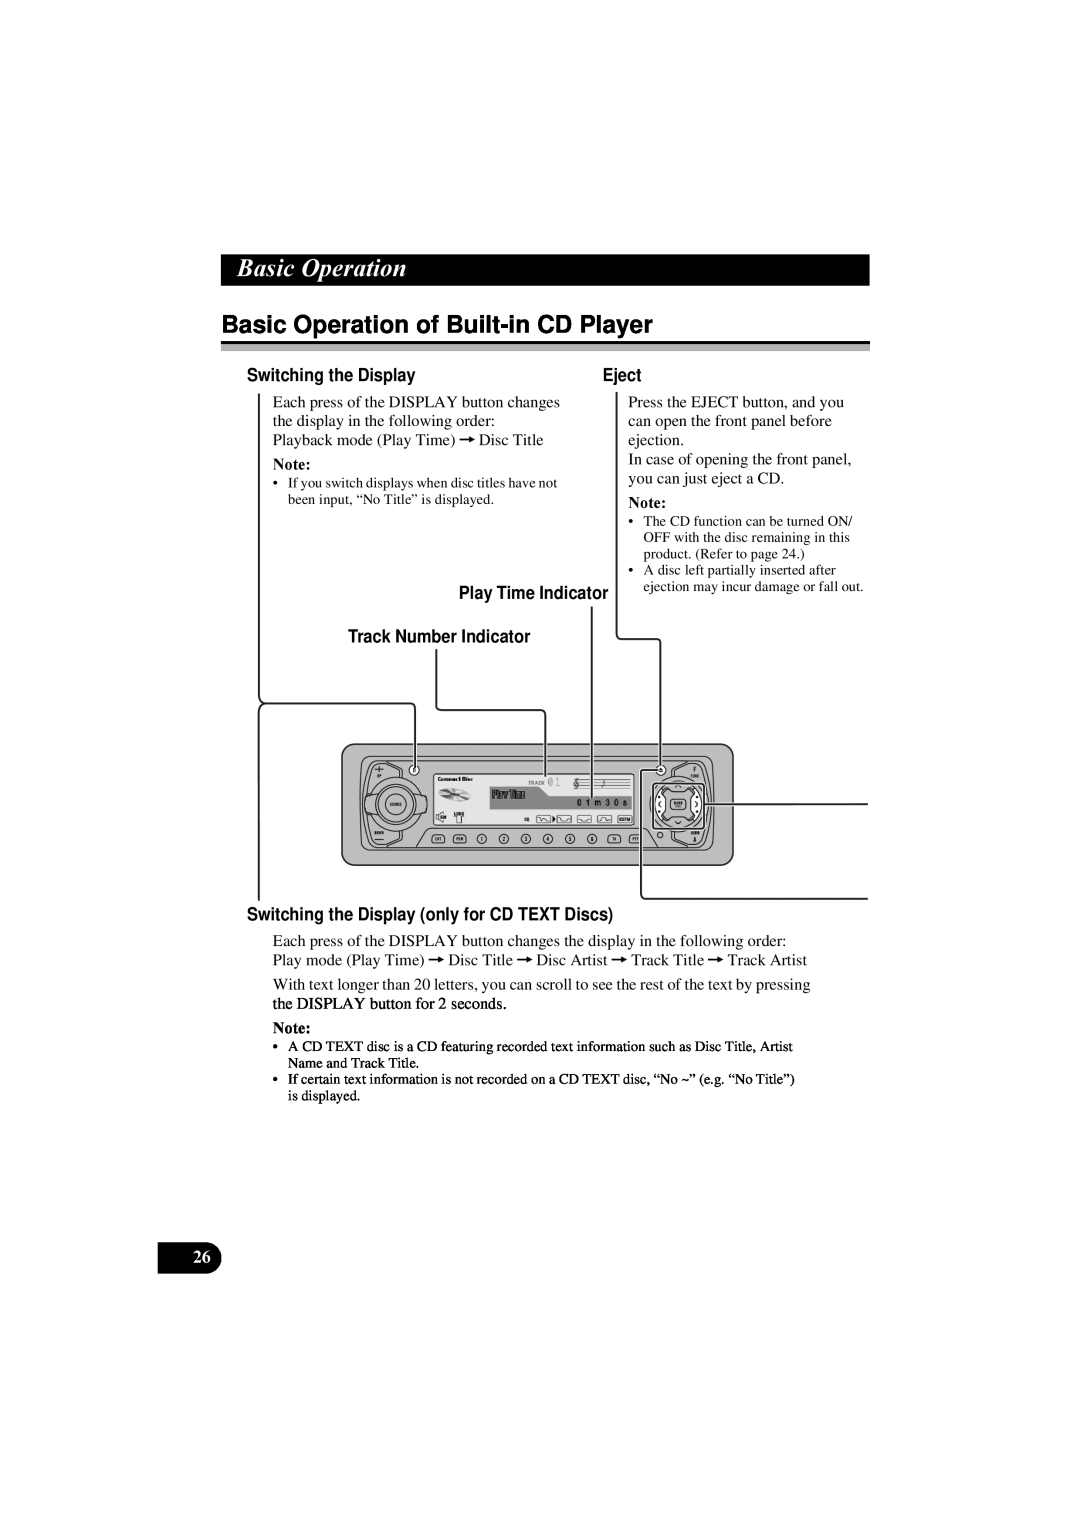 Pioneer DEH-P8100R Basic Operation of Built-inCD Player, Switching the Display, Play Time Indicator Track Number Indicator 